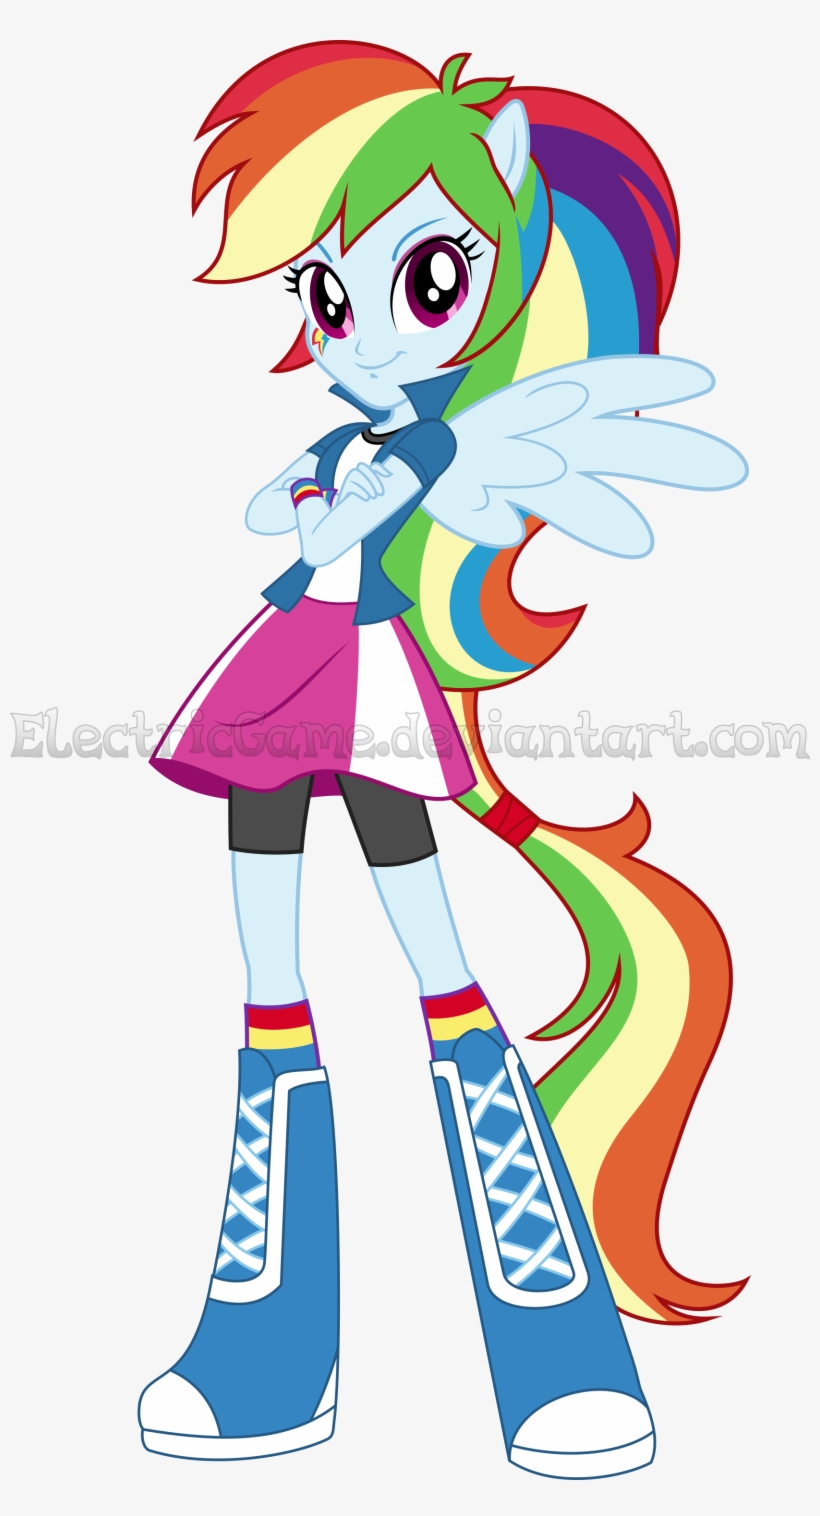 Mlp Eg The Equestria Girls Rainbow Vector By Electricgame-d9opi7c - My Little Pony And Equestria Imagine Ink Book Bundle, transparent png #1057968